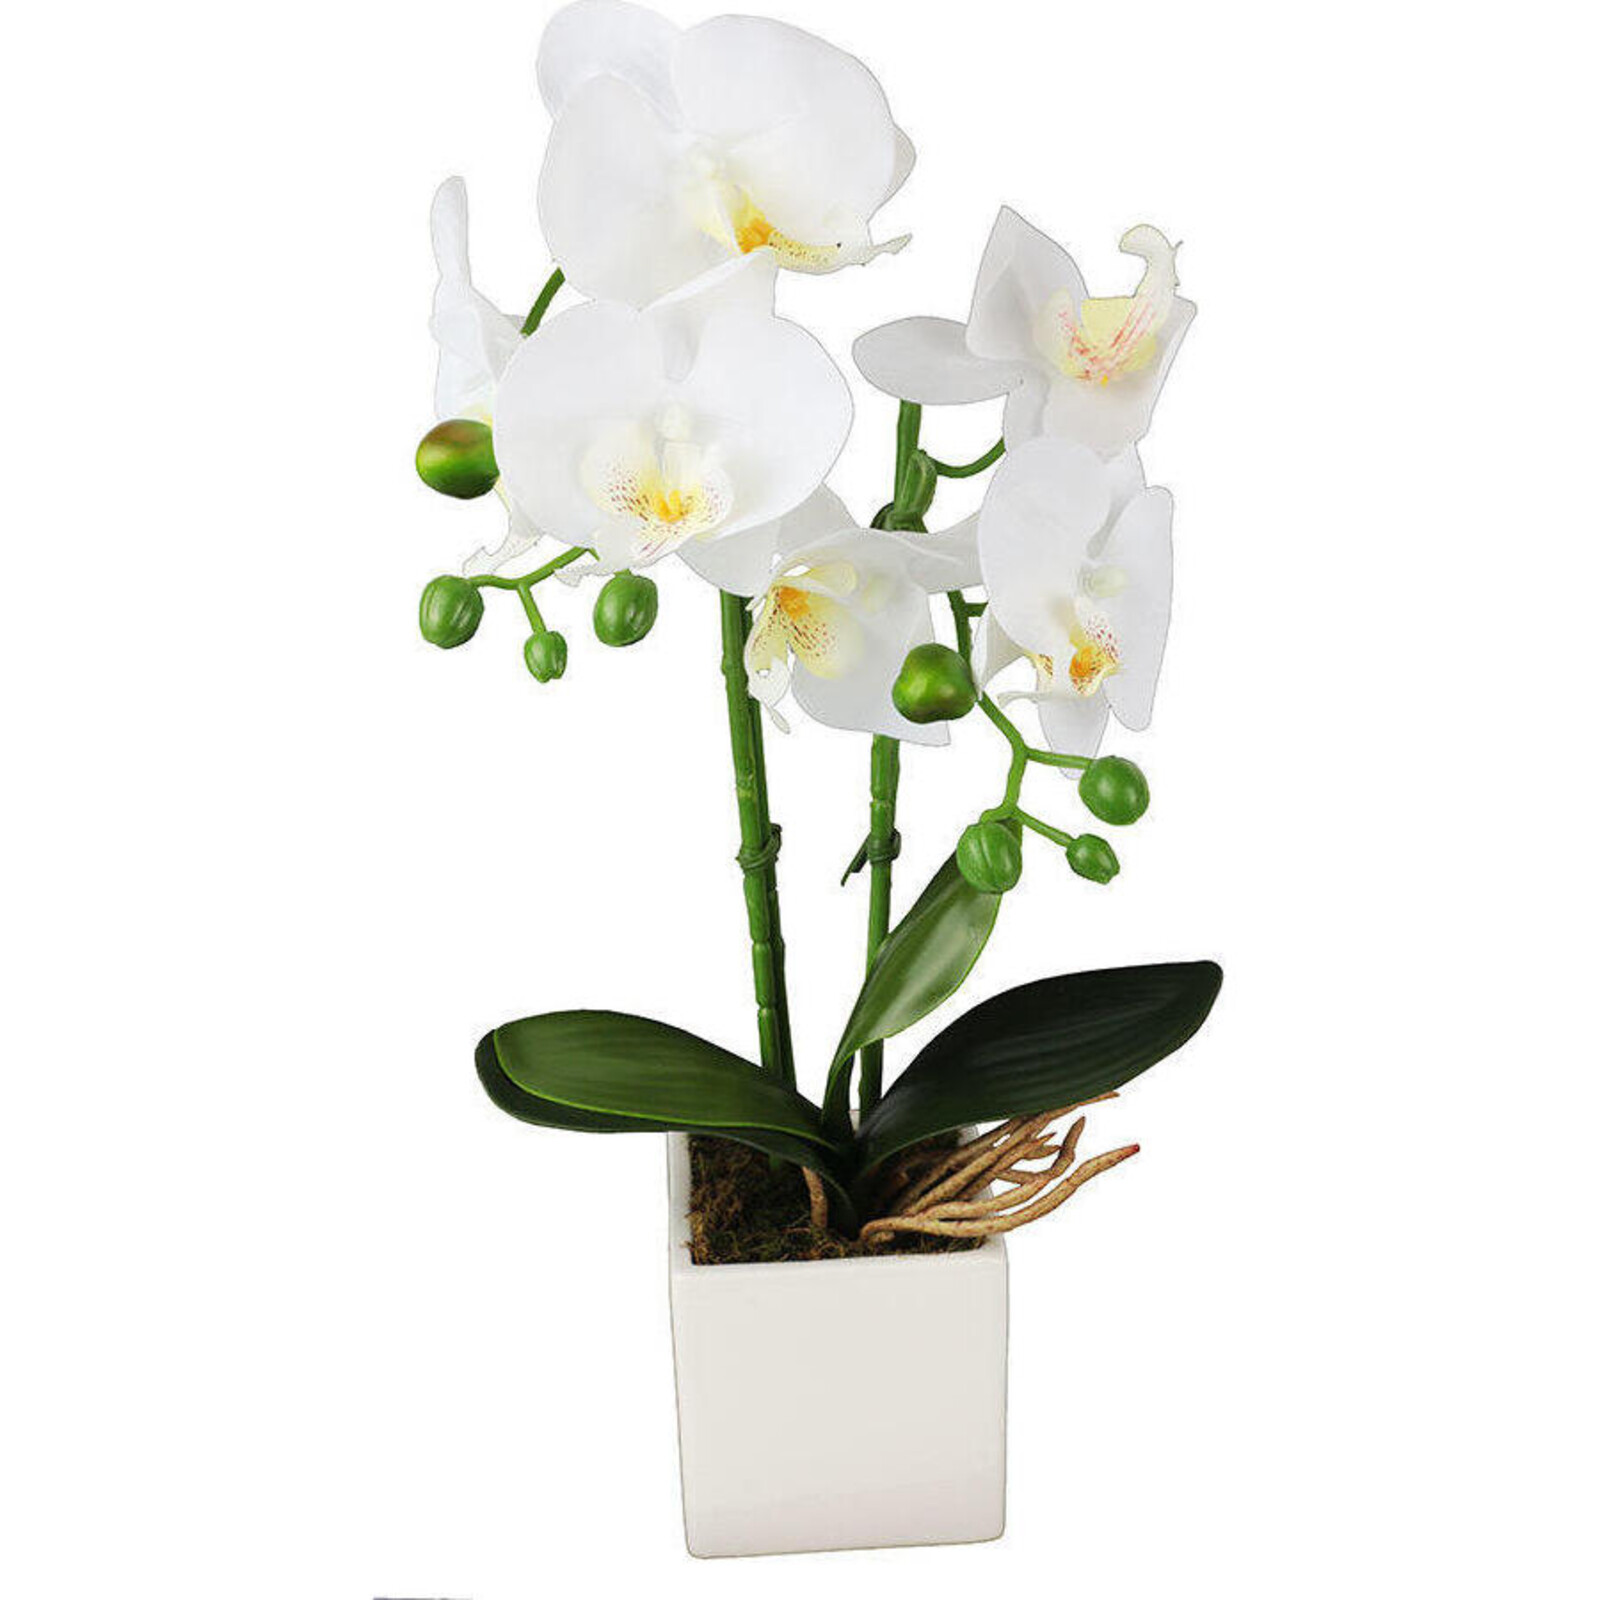 Imitation Orchid White Small